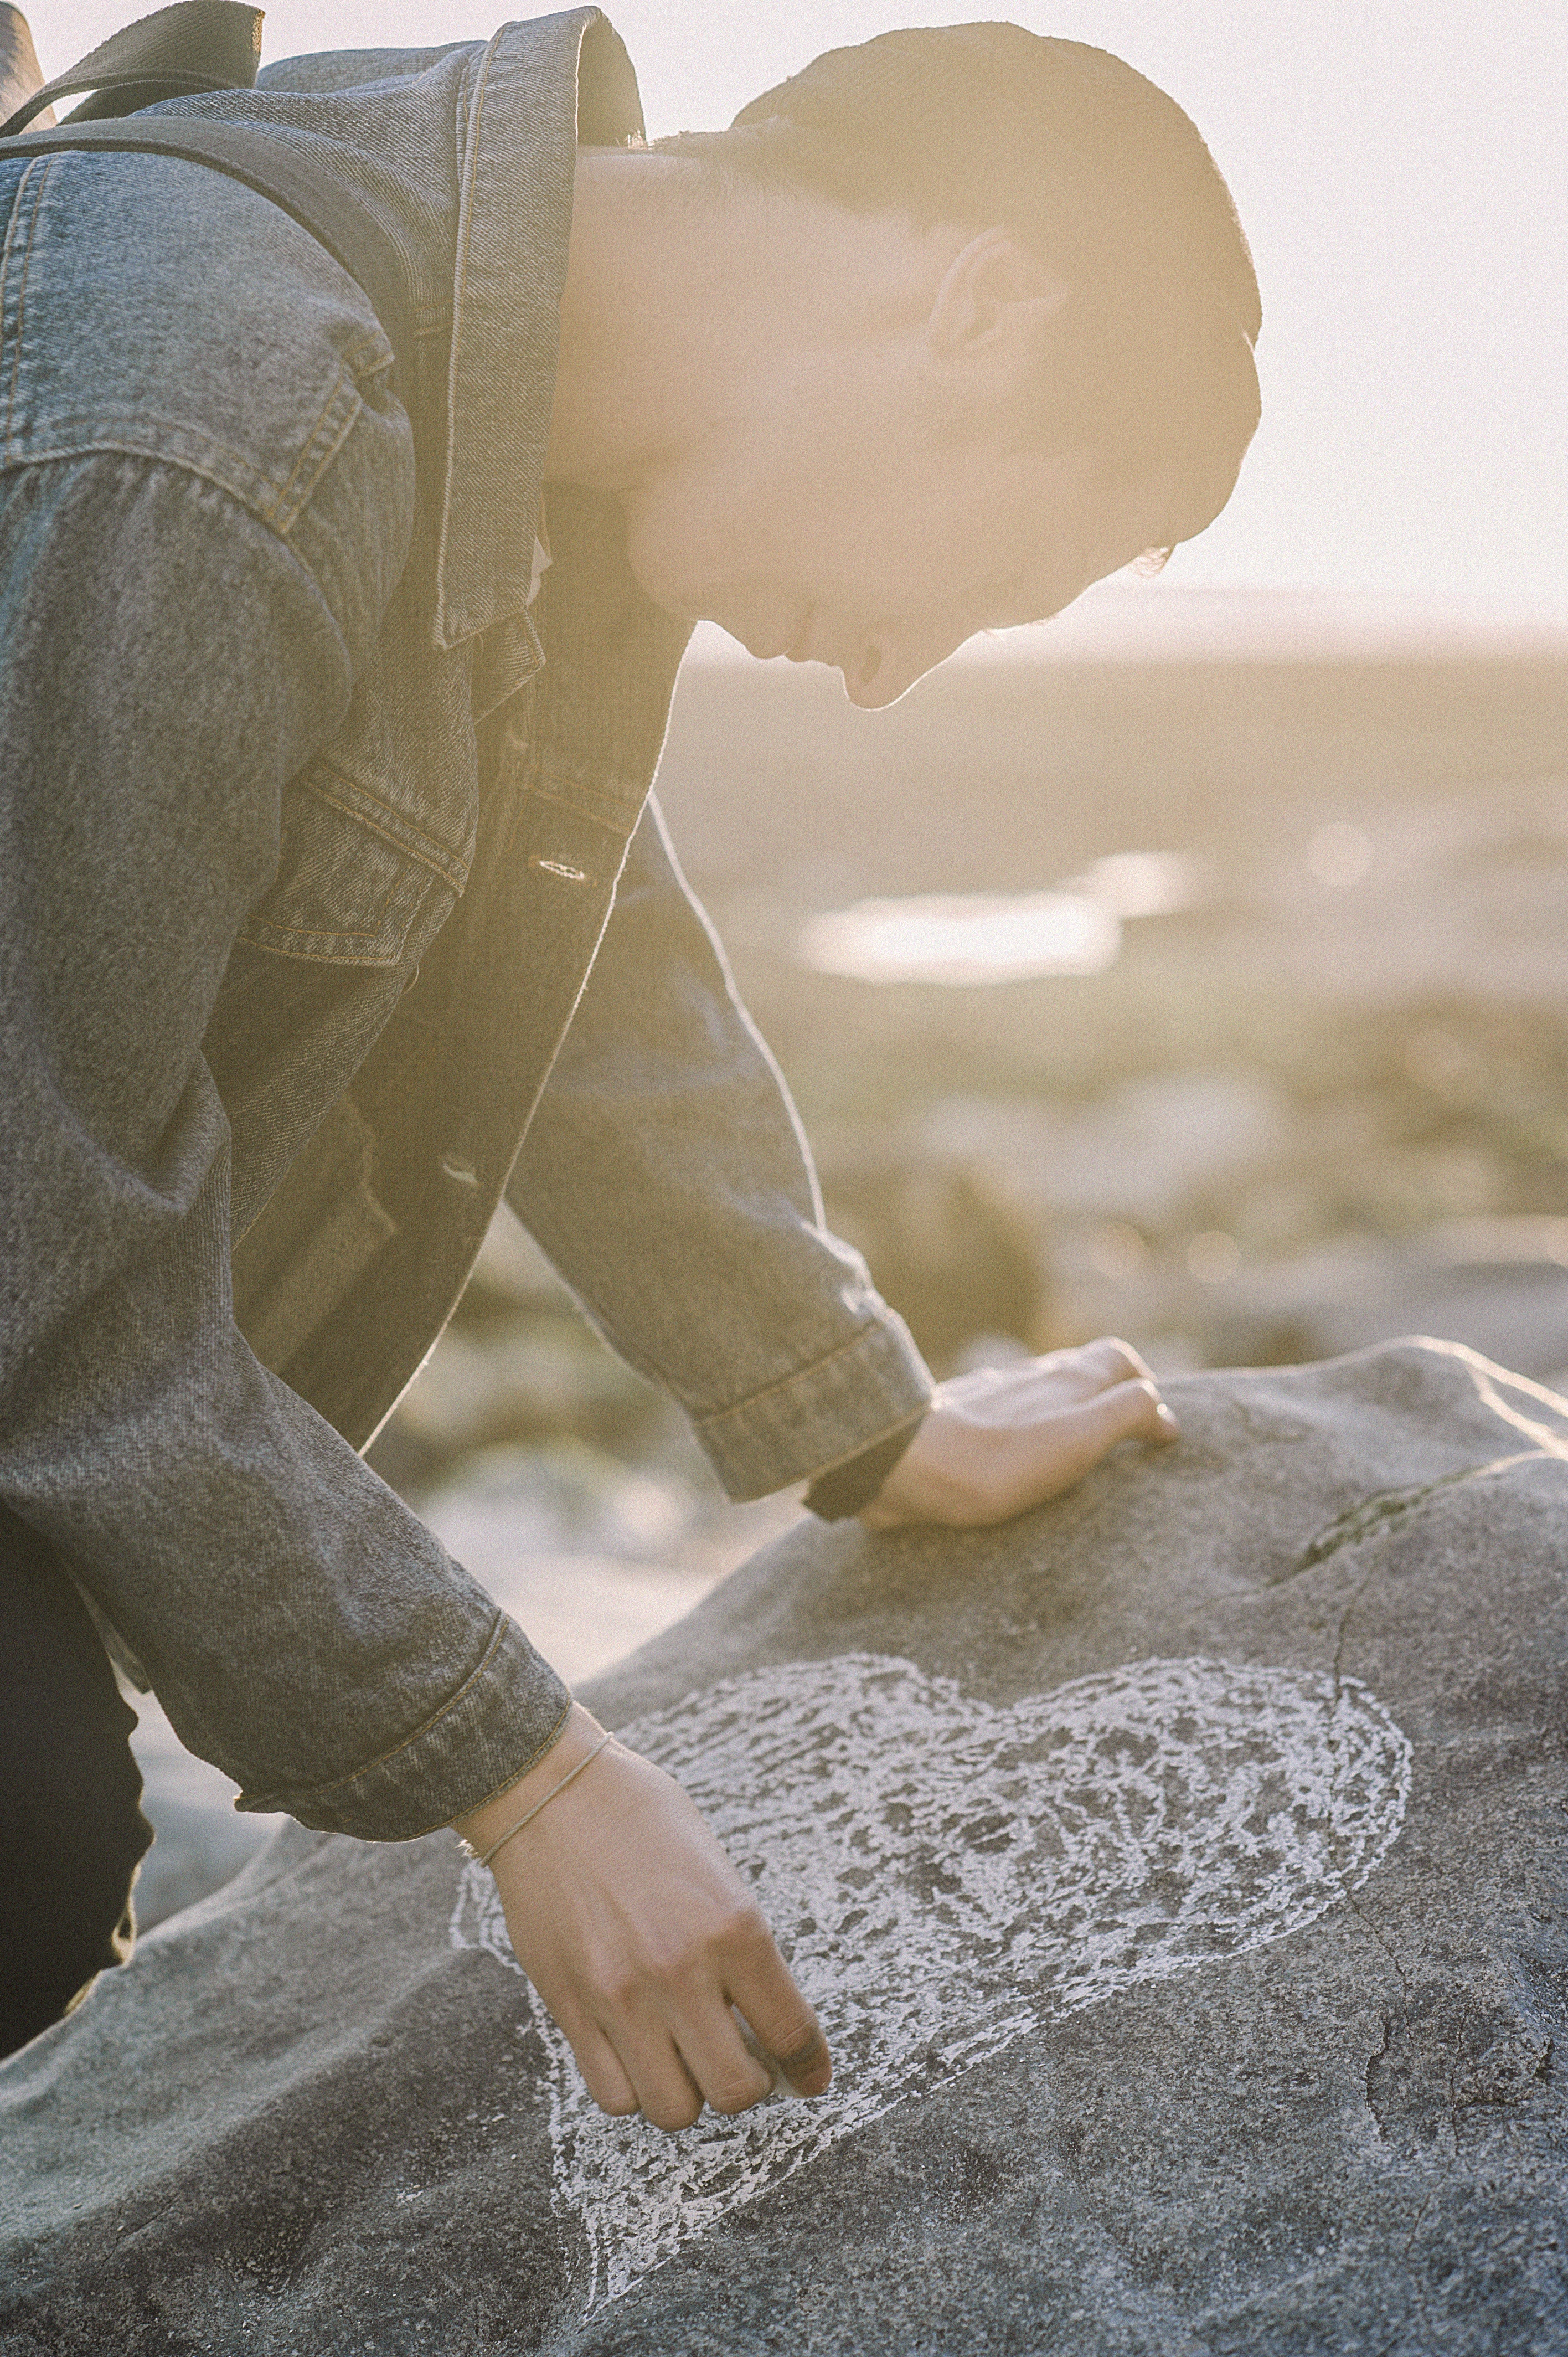 Man sketching heart on a gray rock photo